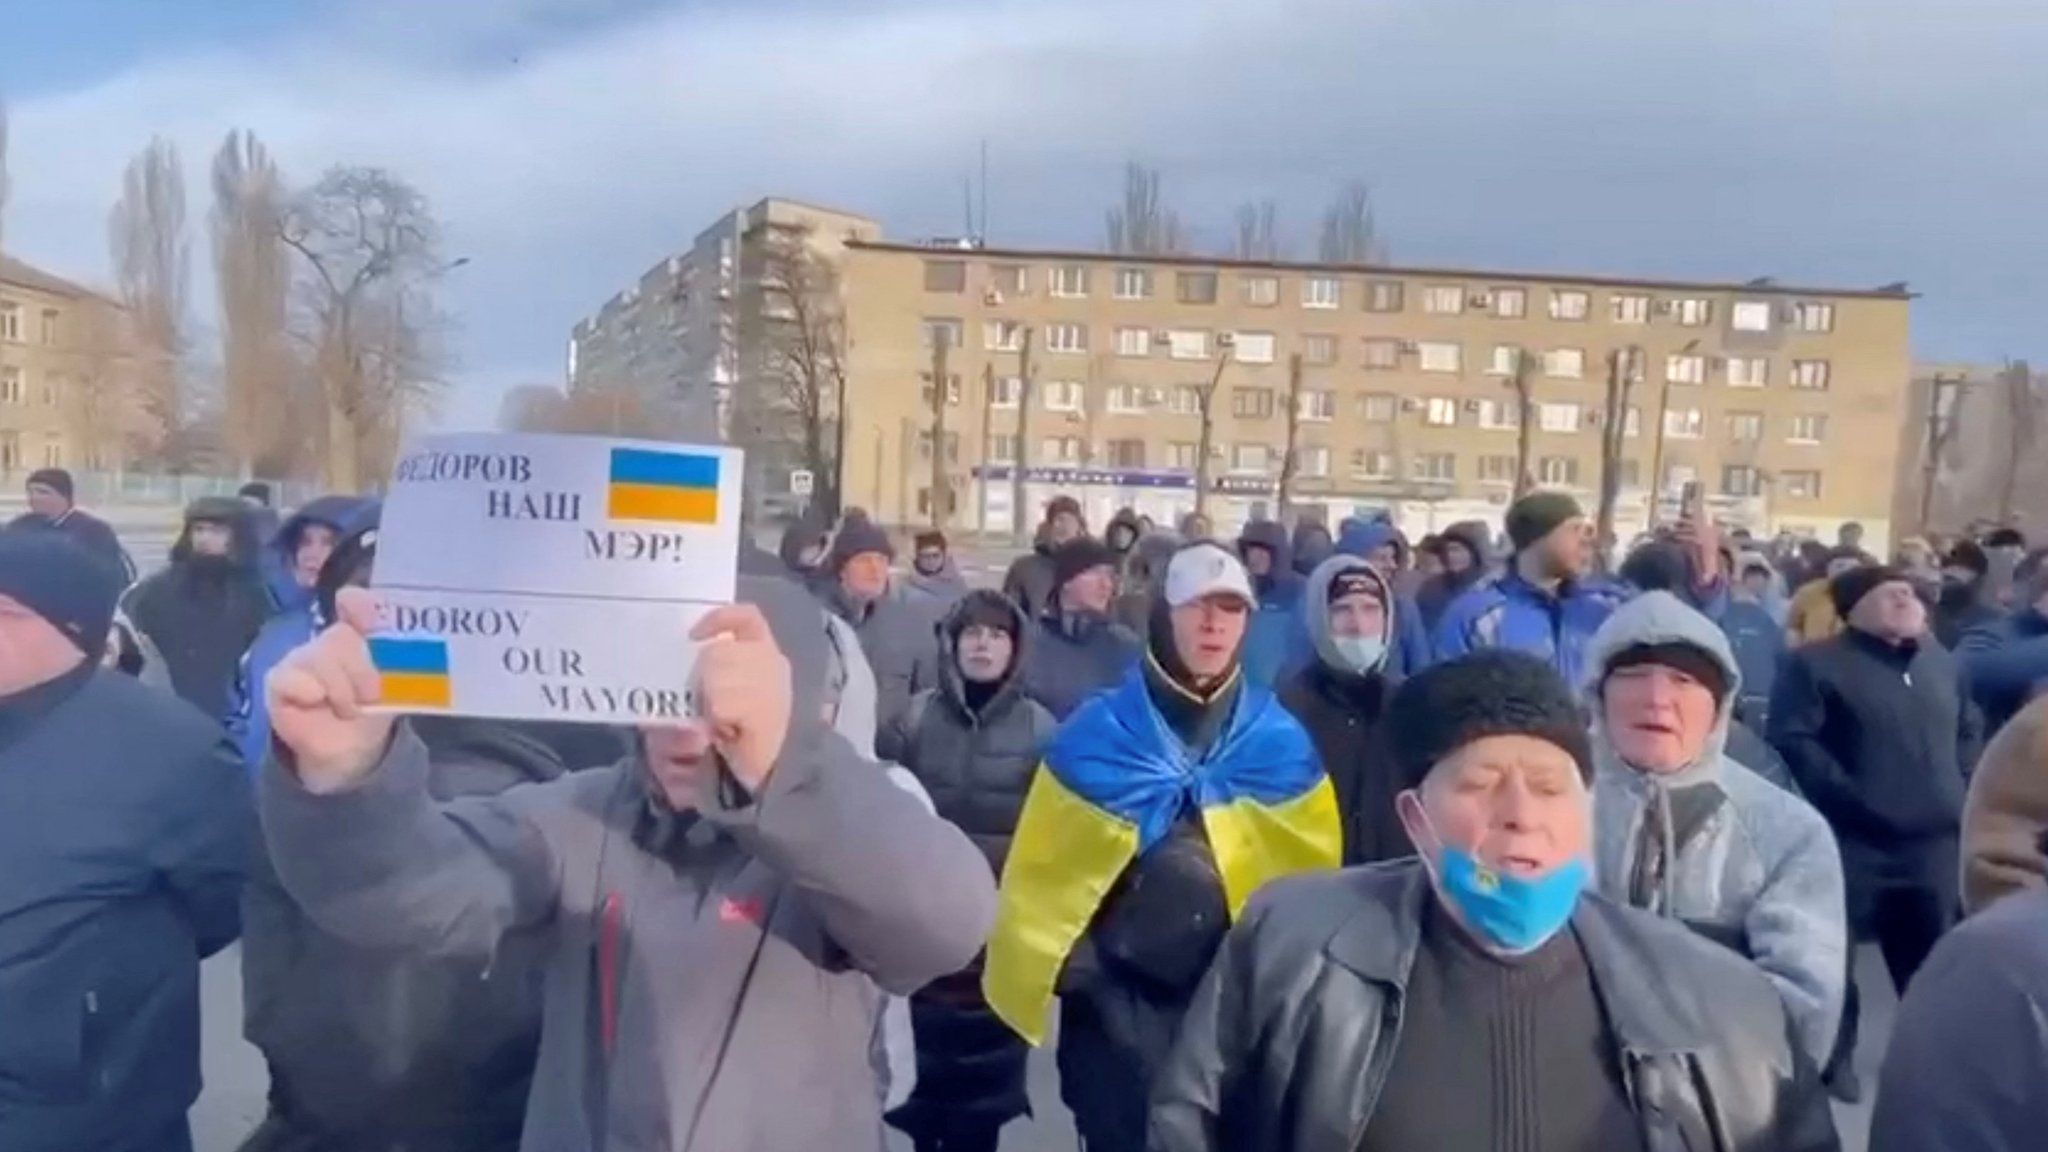 People protest the abduction of Mayor Ivan Federov, outside the Melitopol regional administration building, after he was reportedly taken away by Russian forces, during their ongoing invasion, in Melitopol, Ukraine in this still image obtained from handout video released March 12, 2022. Courtesy of Deputy Head for President"s Office